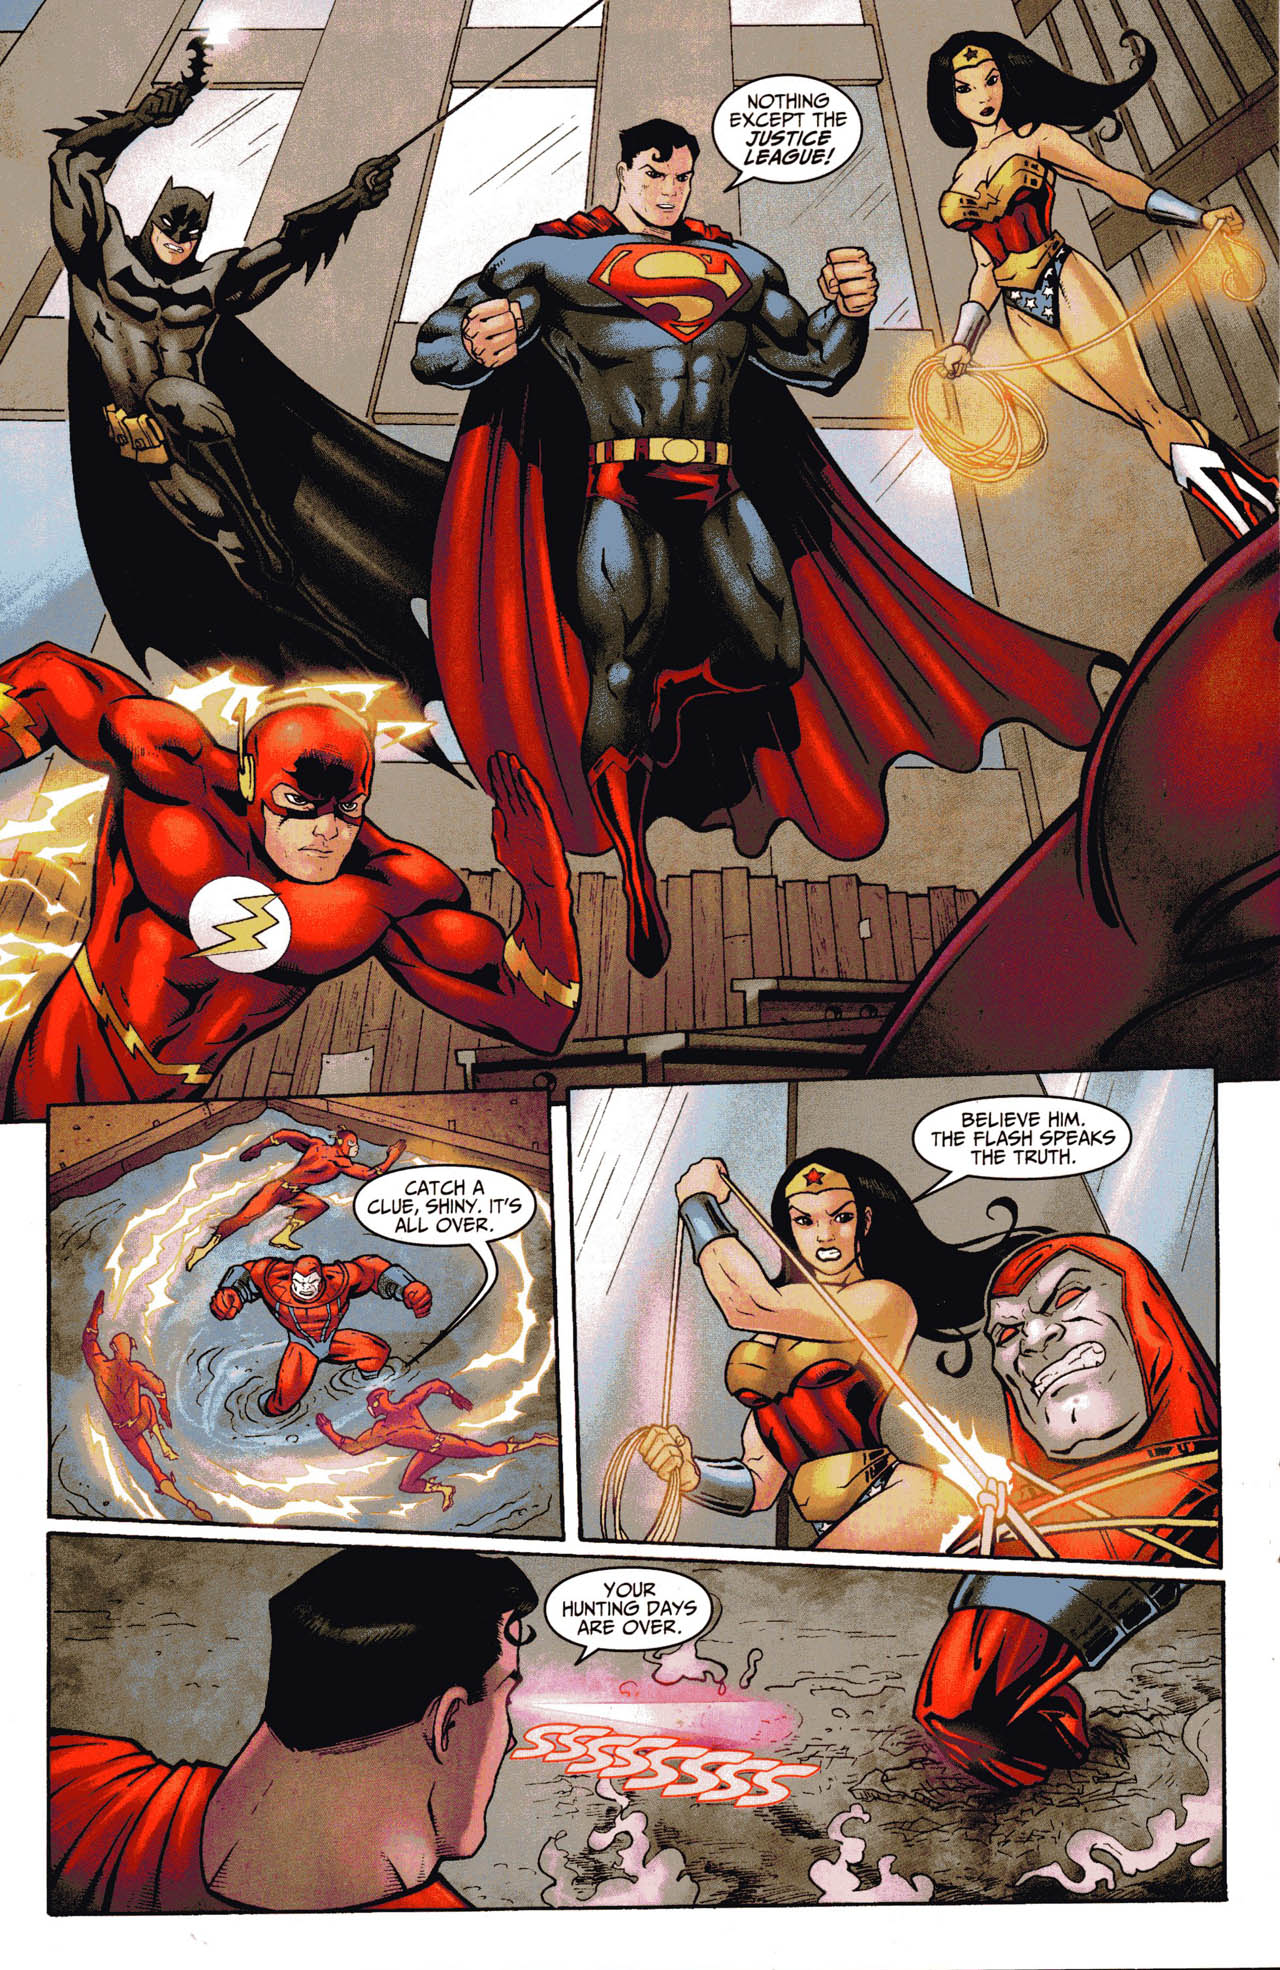 Read online Subway Presents: Justice League comic -  Issue #4 - 6